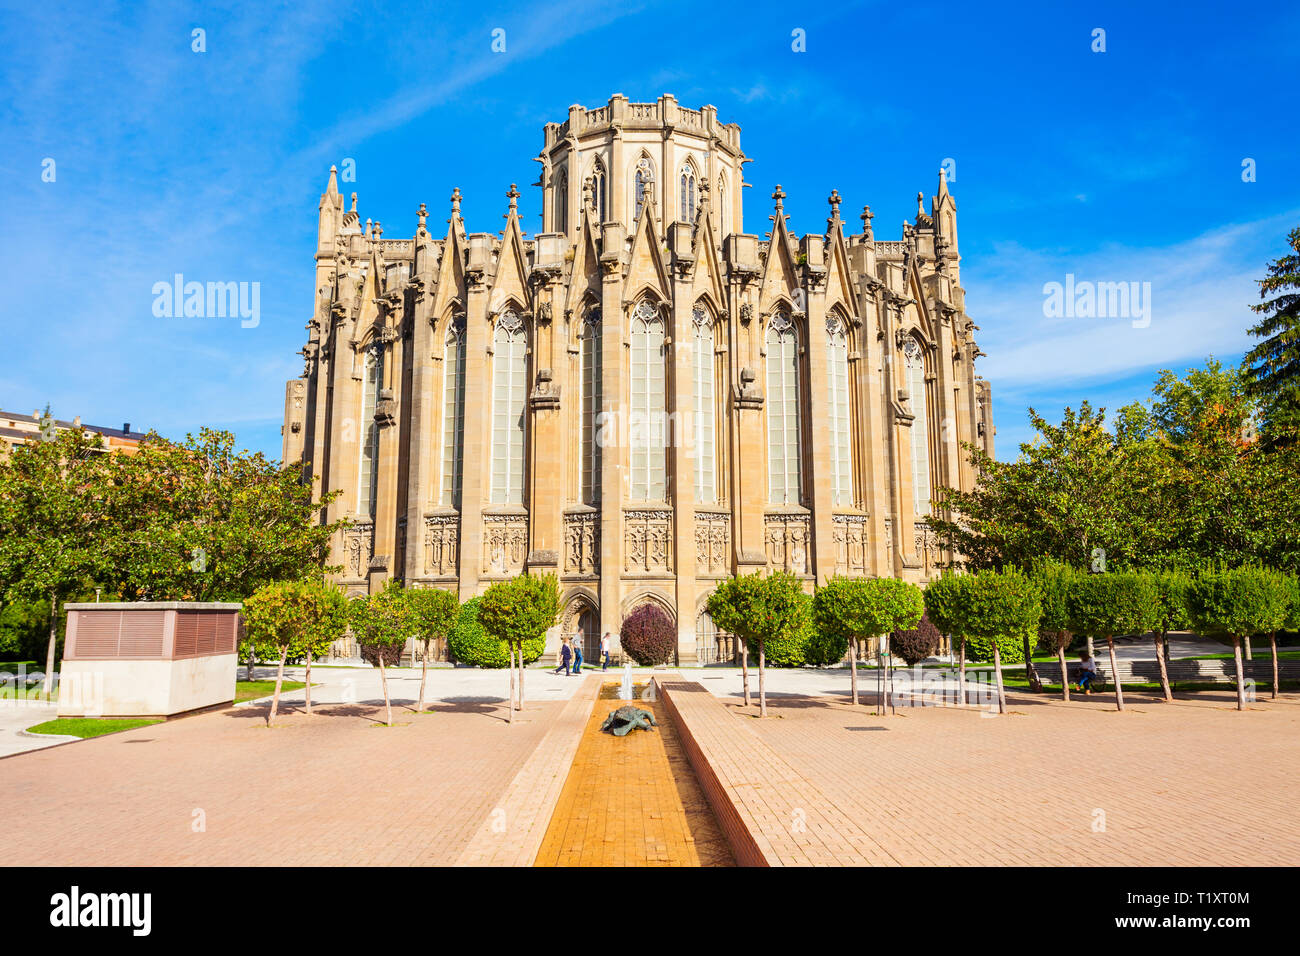 Cathedral of Maria Inmaculada de Vitoria is a roman catholic cathedral located in Vitoria-Gasteiz, Basque country, Spain Stock Photo